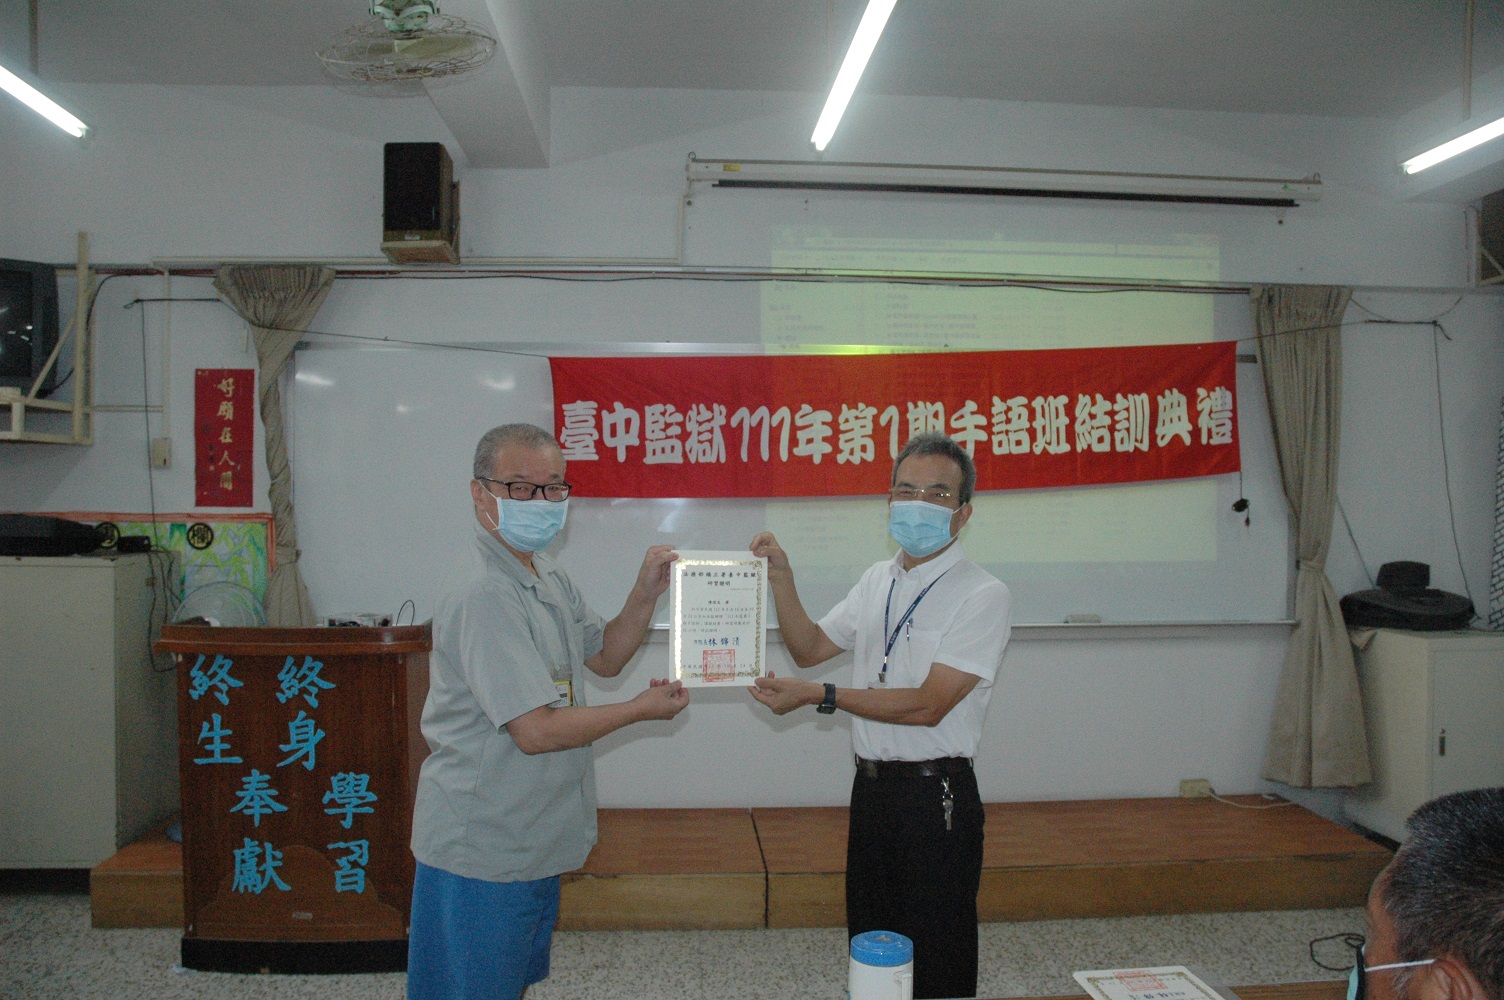 A sign language learner receives his certificate